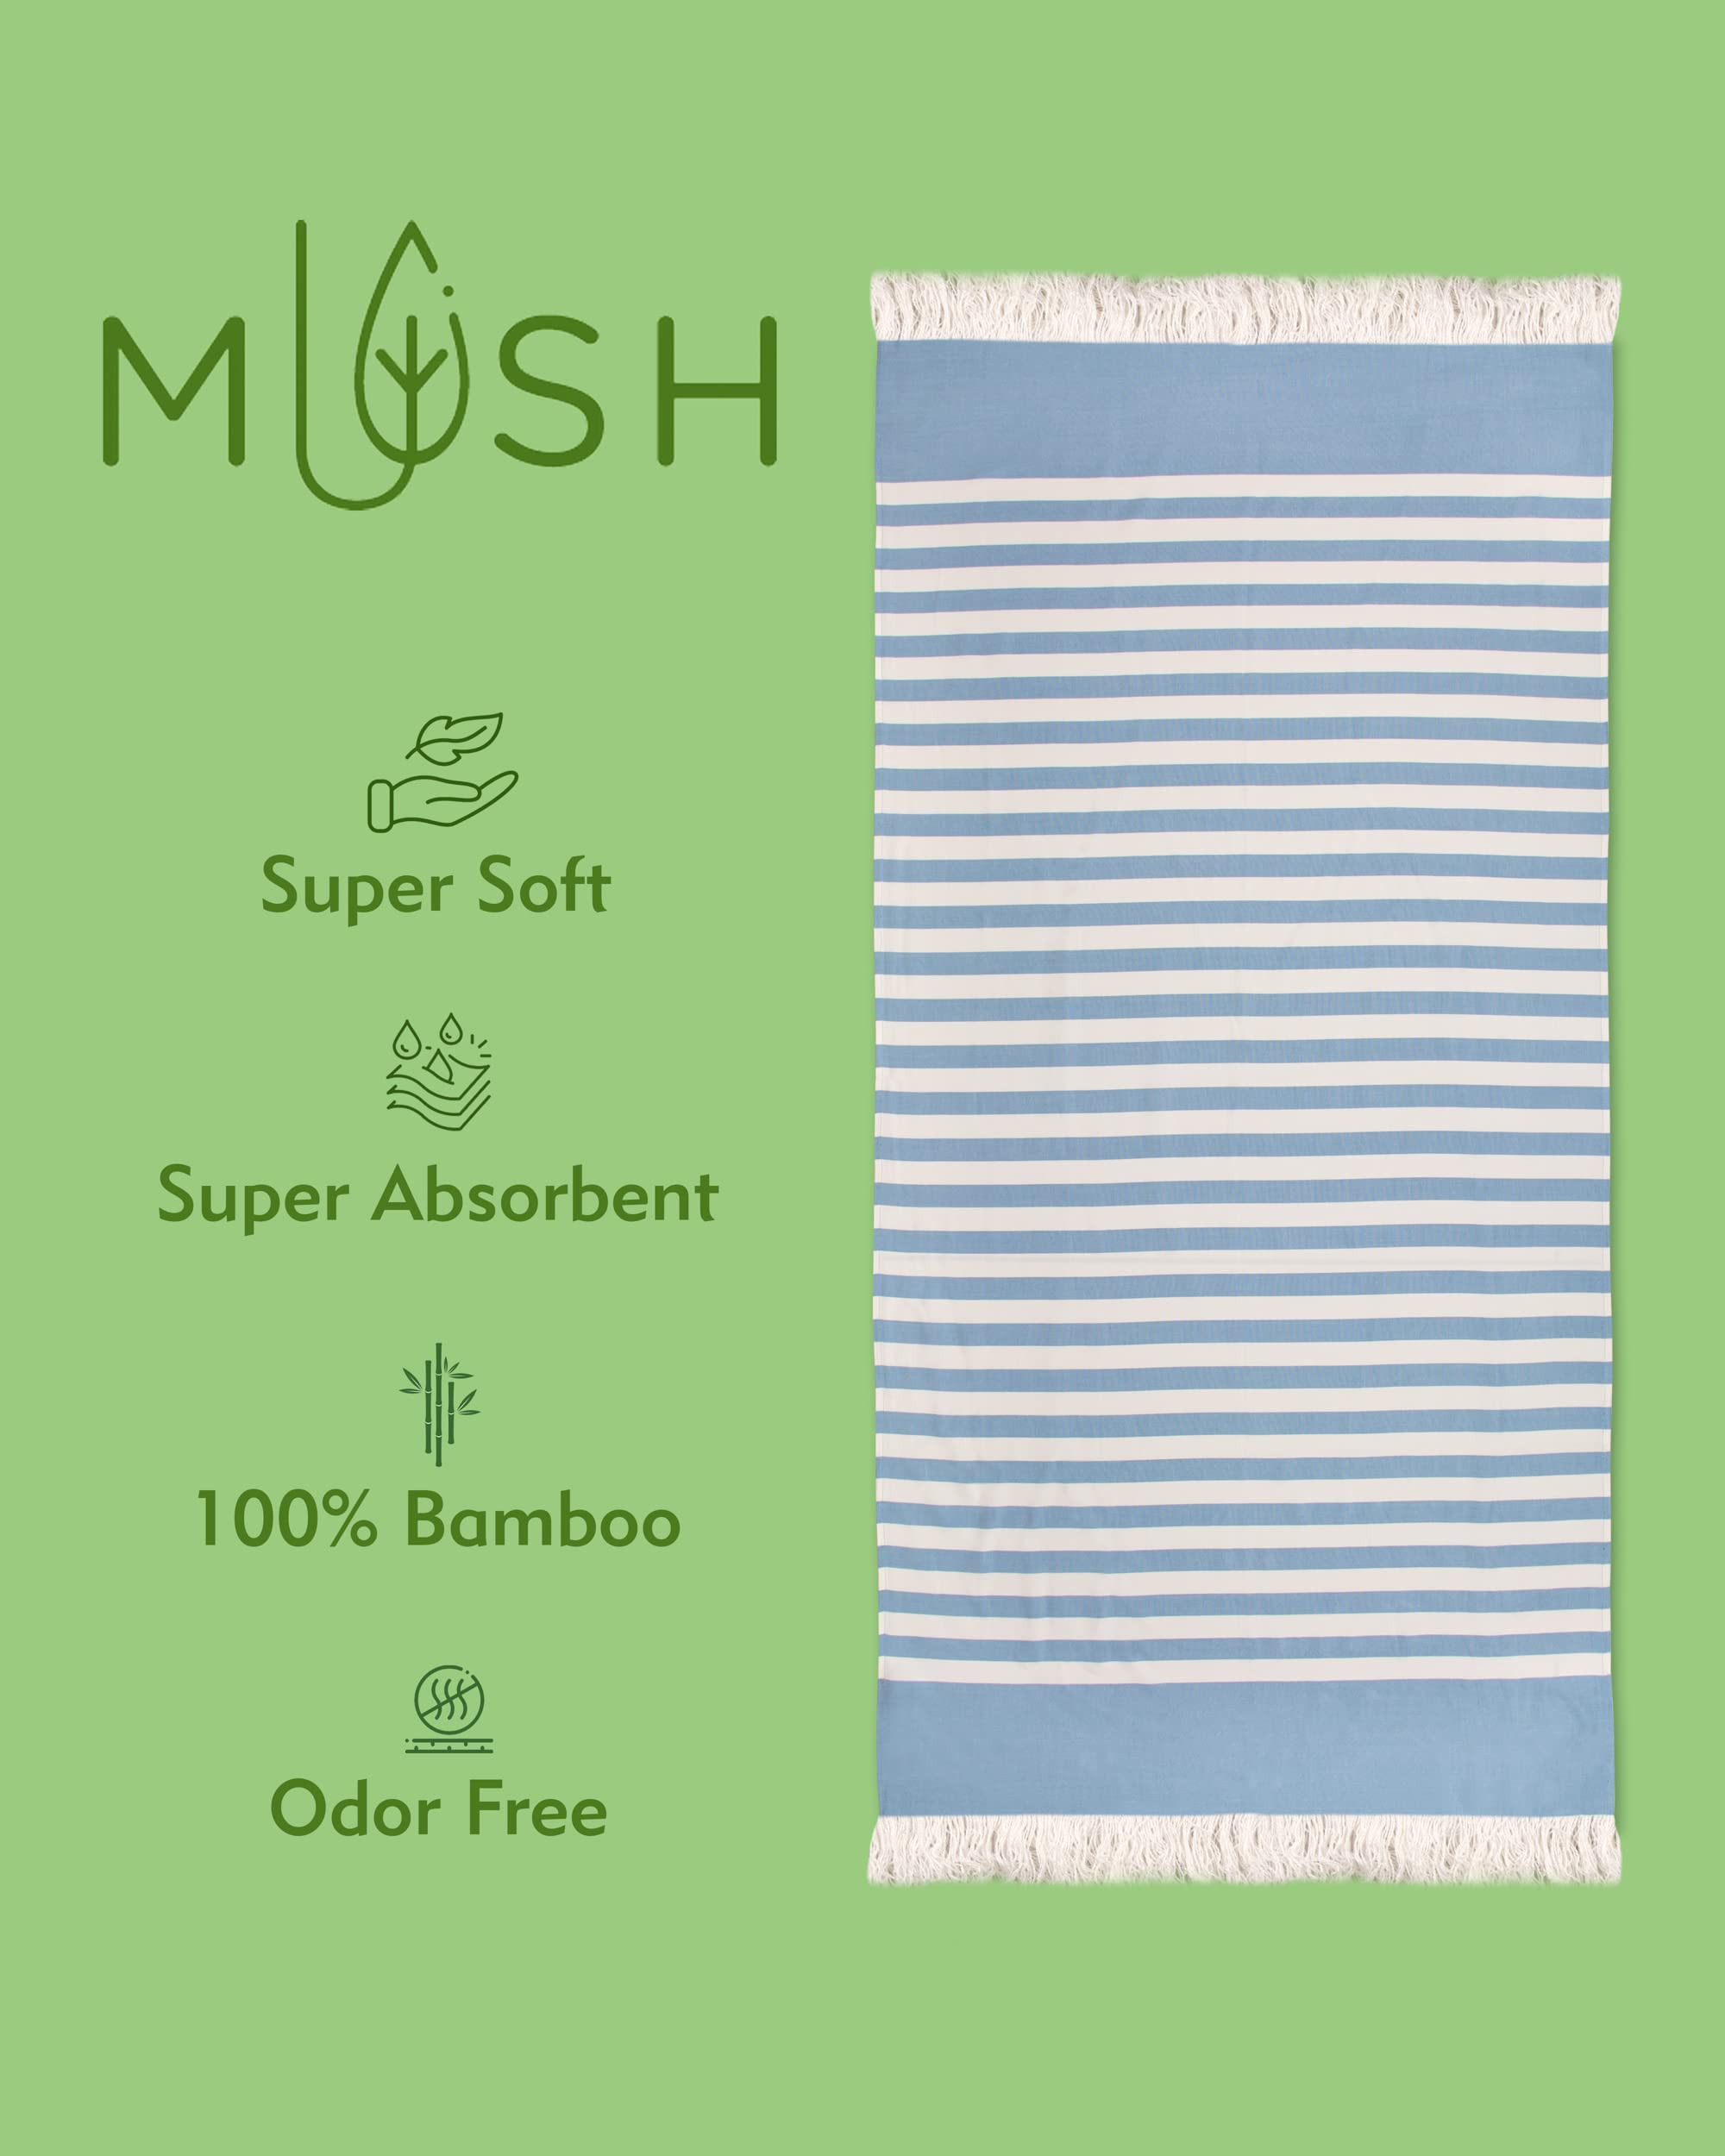 Mush 100% Bamboo Light Weight & Ultra-Compact Turkish Towel Super Soft, Absorbent, Quick Dry,Anti-Odor Bamboo Towel for Bath,Travel,Gym, Swim and Workout (1, Ice melt Blue)